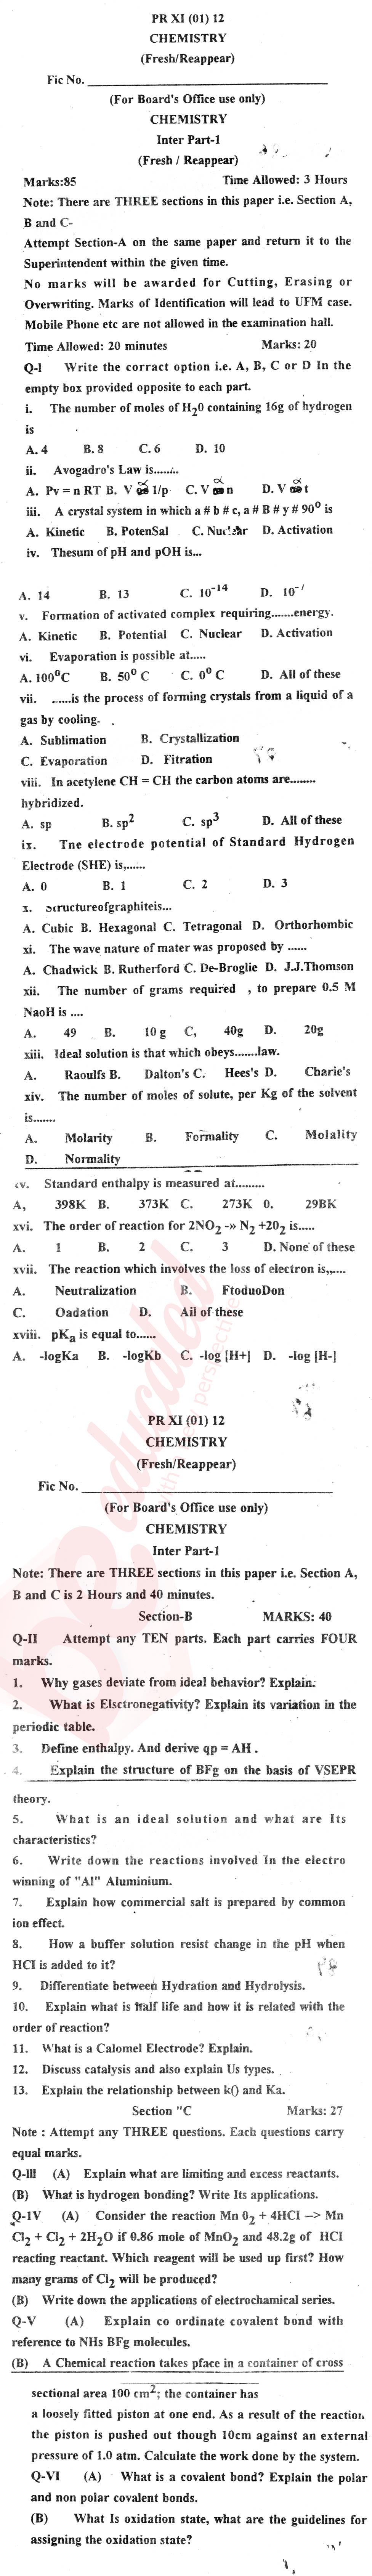 Chemistry FSC Part 1 Past Paper Group 1 BISE Malakand 2012